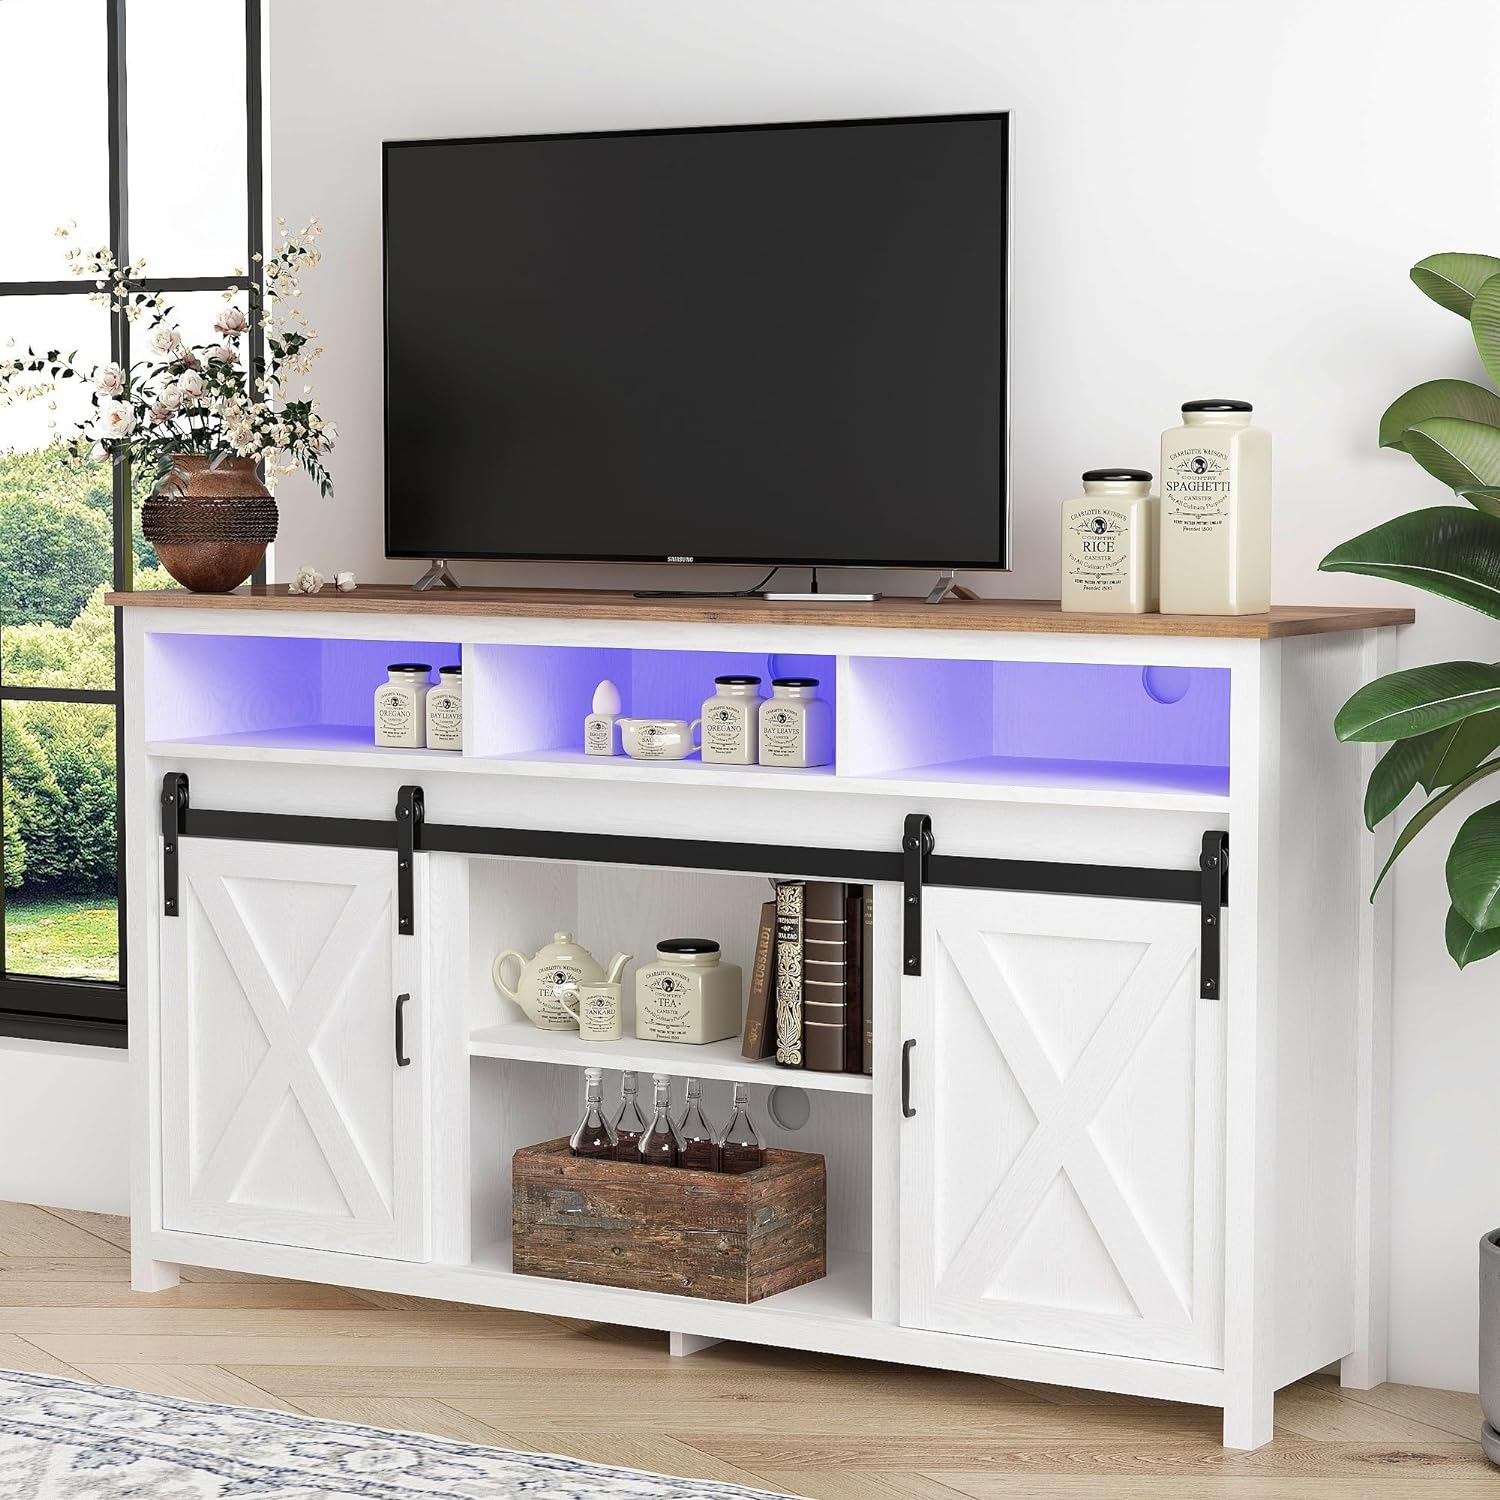 57" Farmhouse Coffee Bar Cabinet with LED Light & Outlet & Charging Port, Sliding Barn Door Buffet Cabinet Sideboard Kitchen Storage, White - image 5 of 10